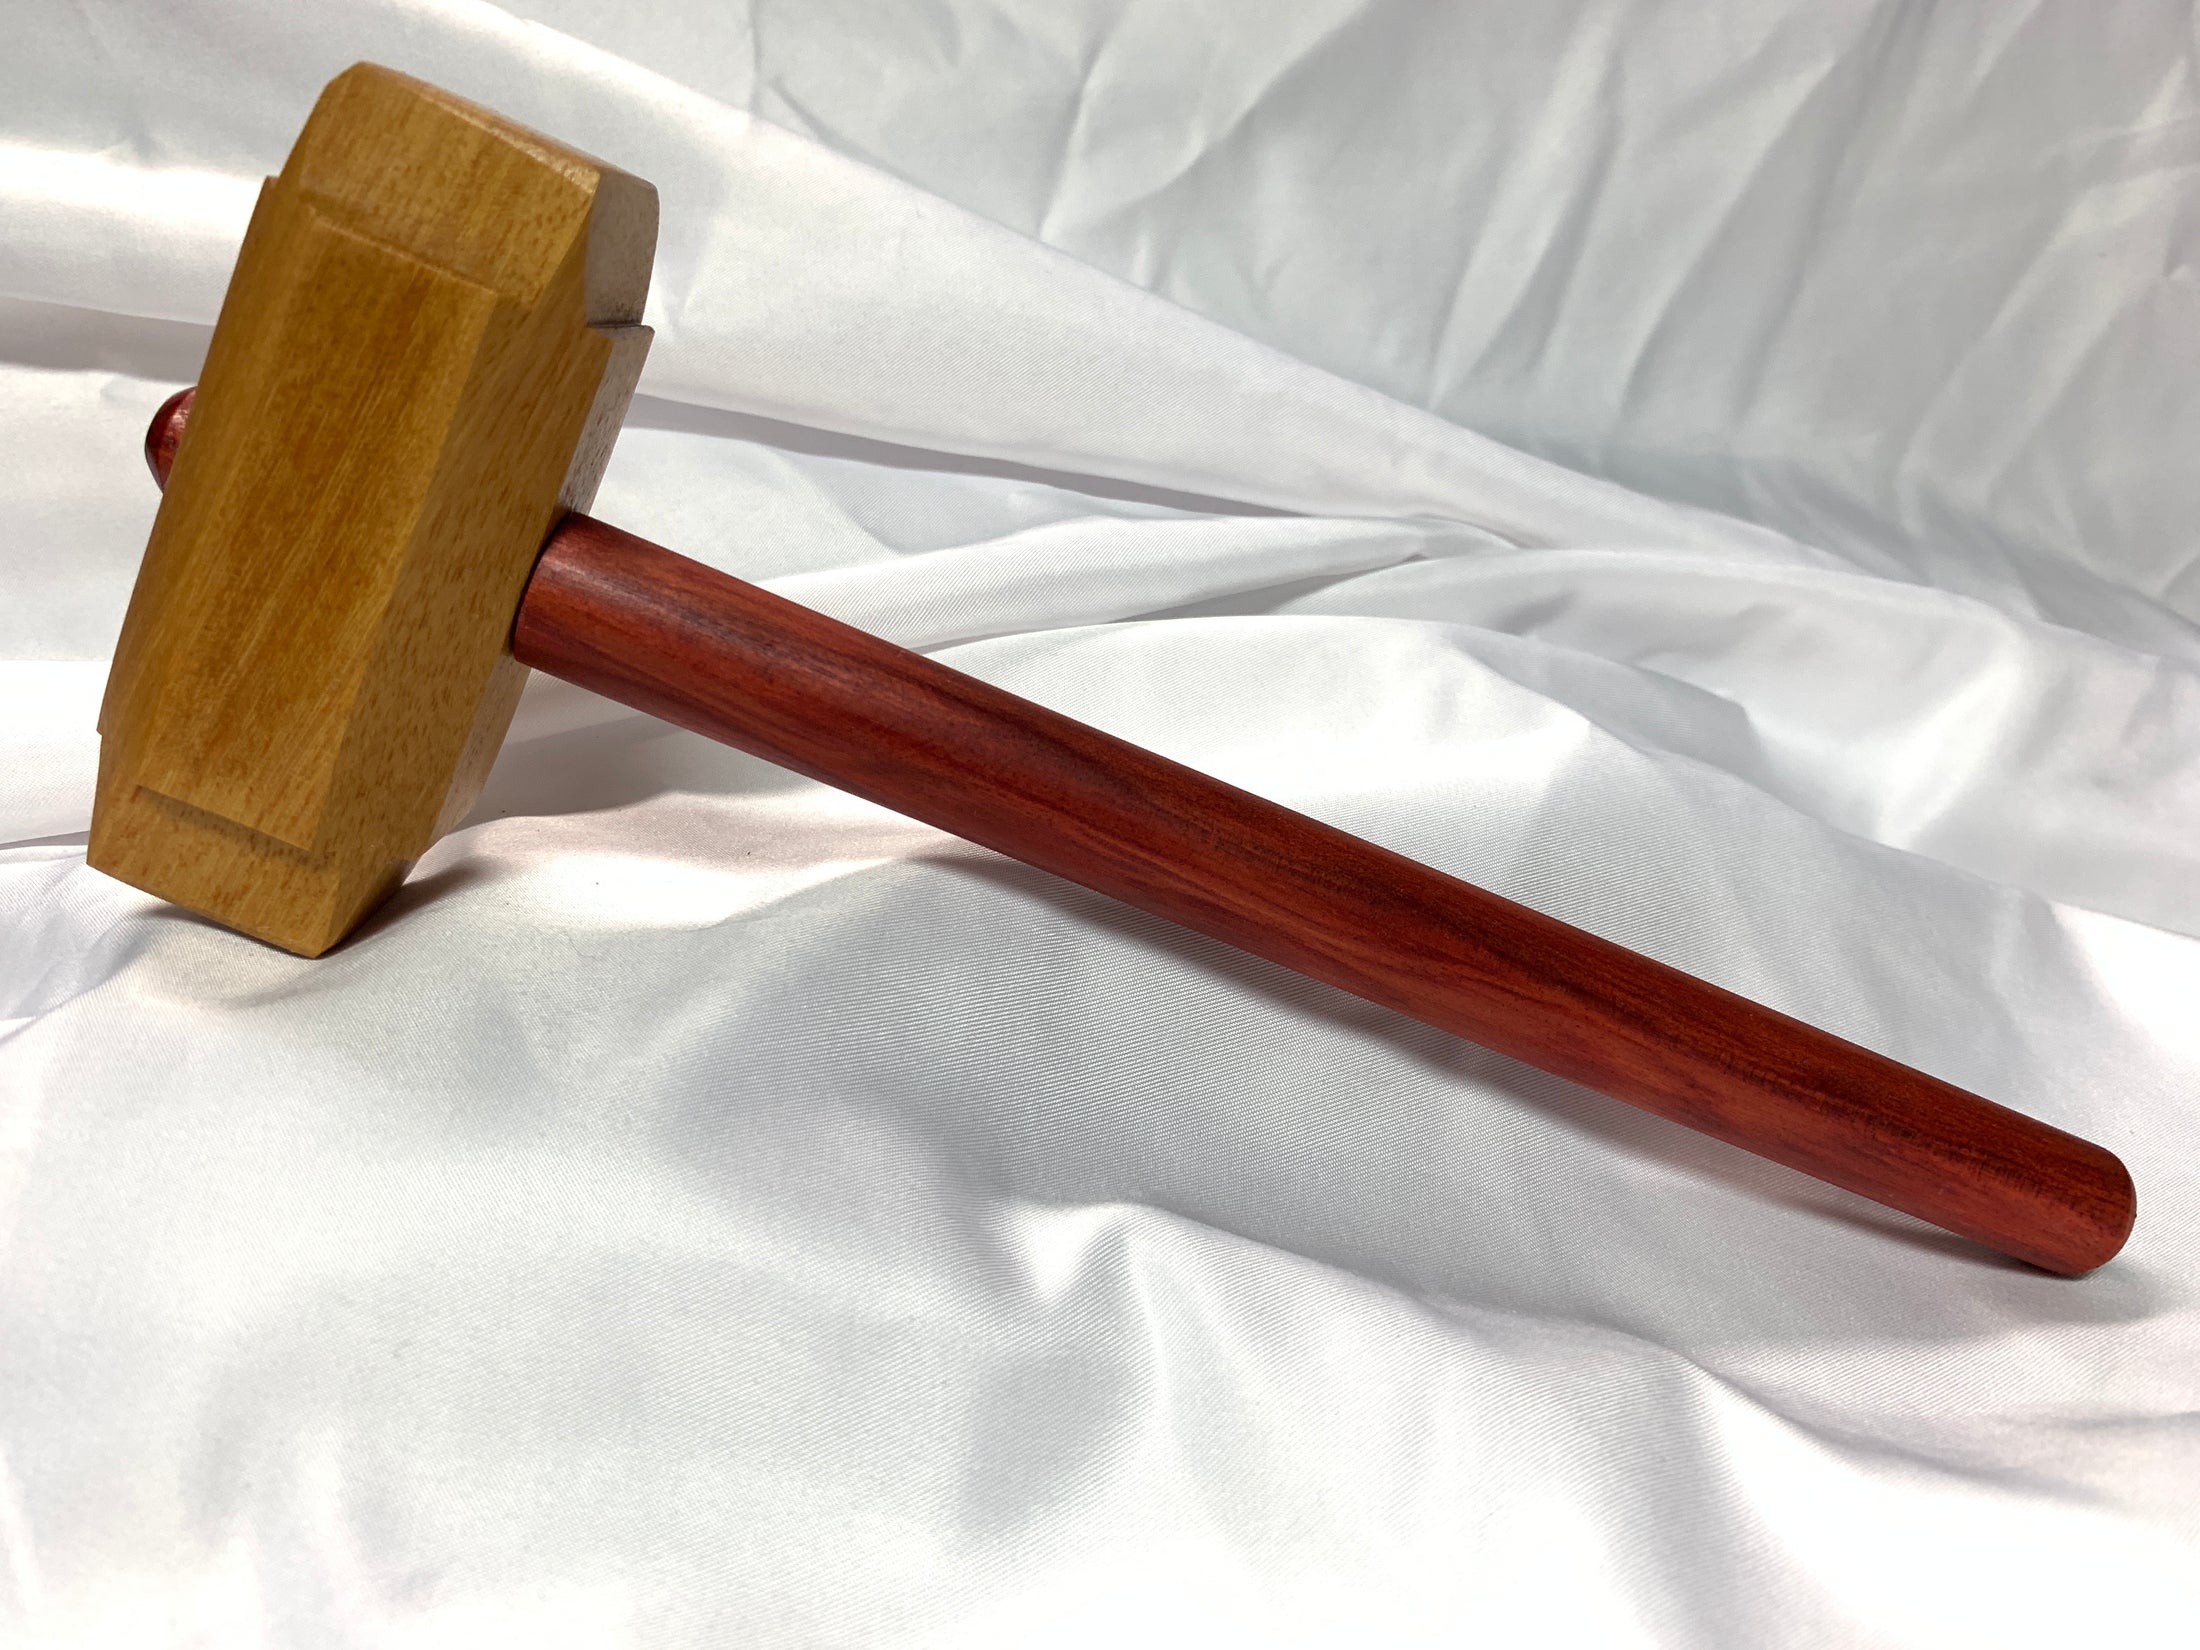 Thors Hammer Woodworking Mallet Osage Orange Head with Redheart Handle Kings Fine Woodworking